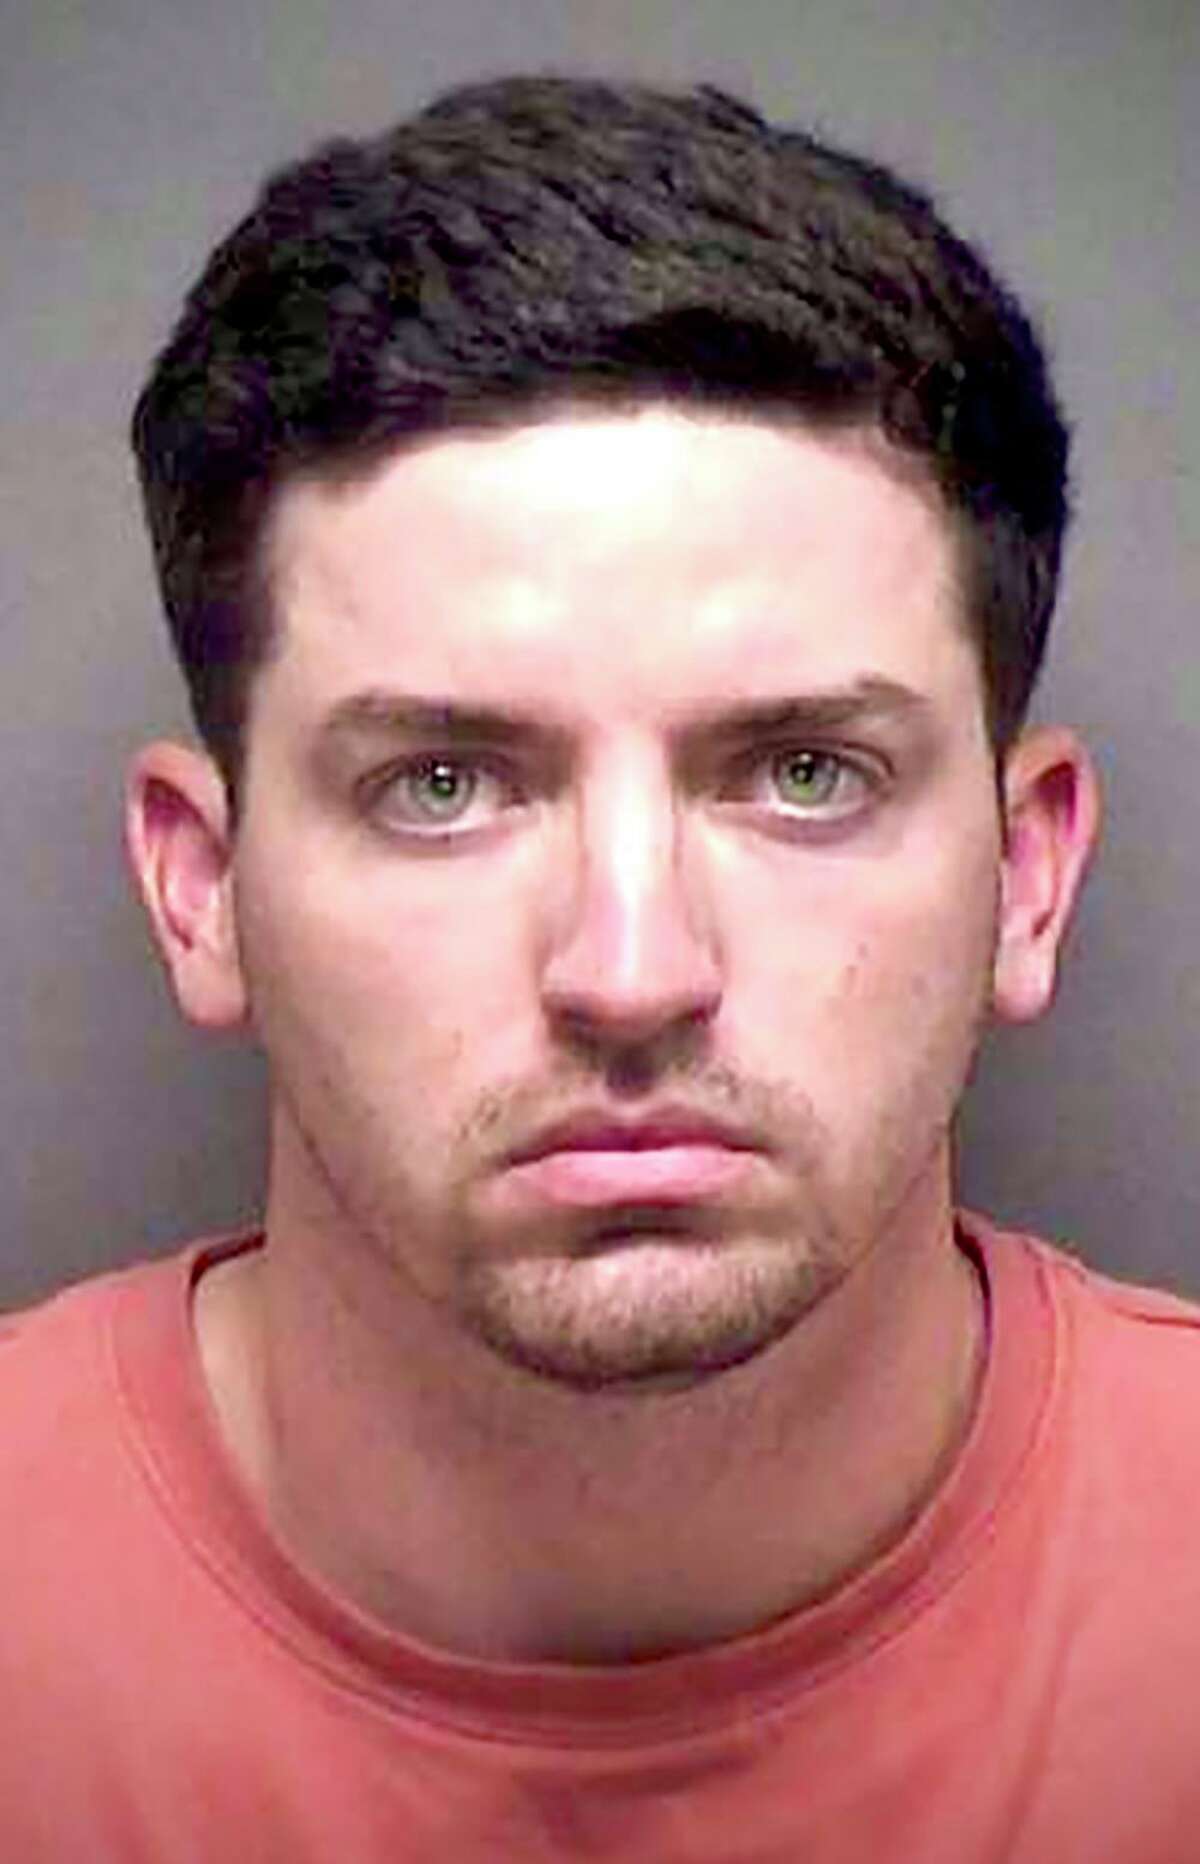 James Brennand, 27, was arrested on Oct. 11 on two counts of aggravated assault by a public servant in connection with the shooting of 17-year-old Erik Cantu on Oct. 2.